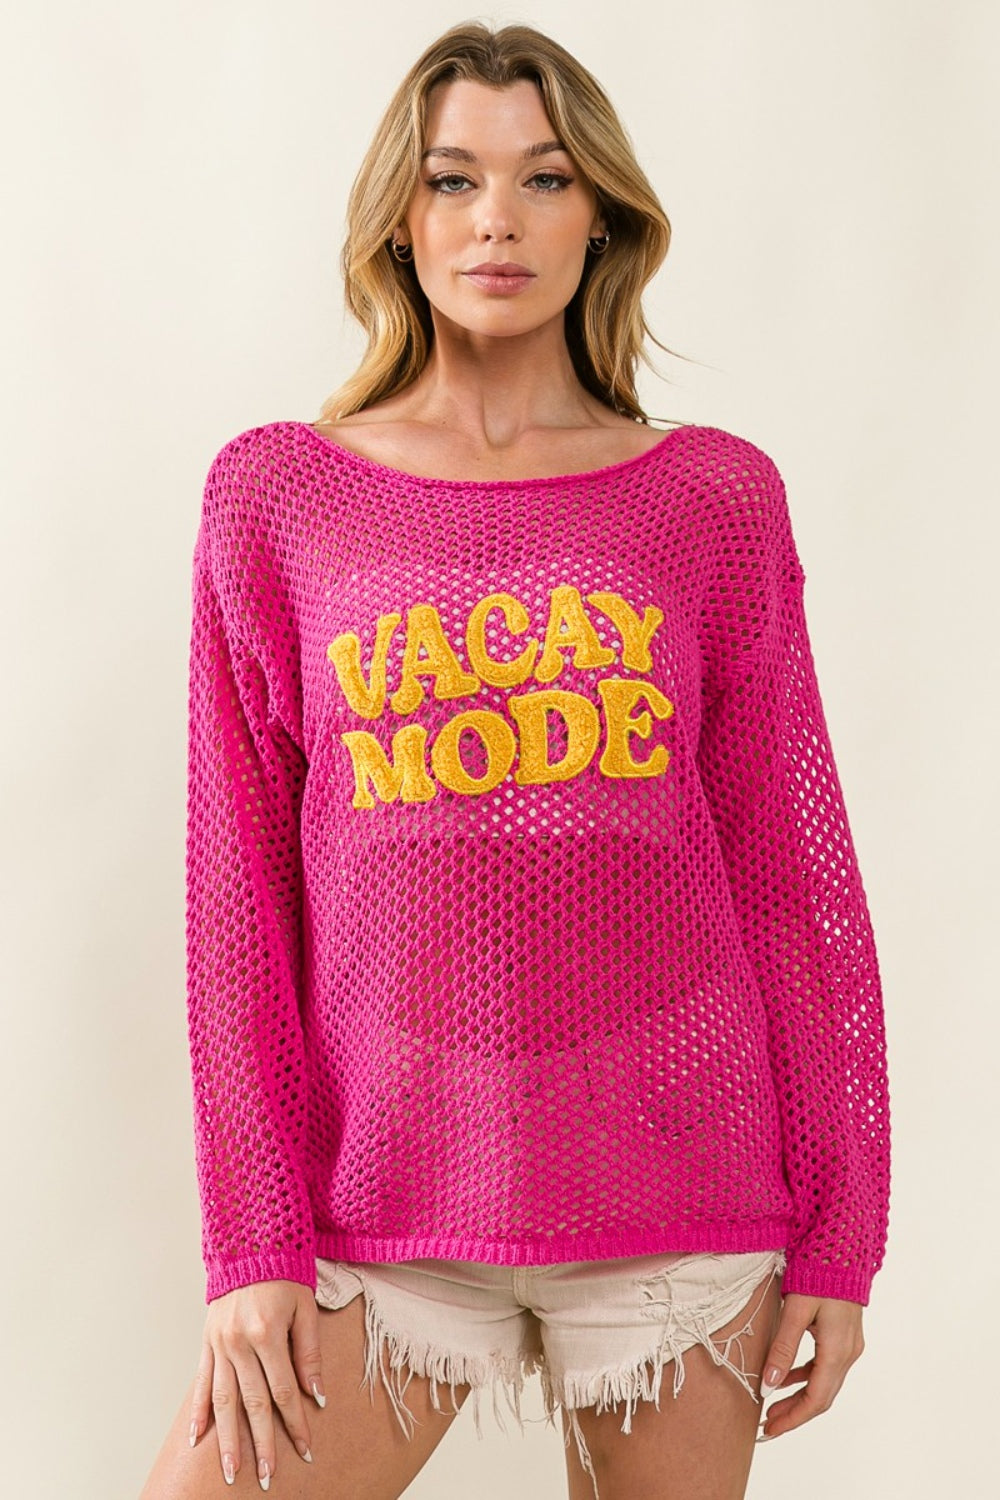 Vacay Mode Embroidered Knit Cover Up